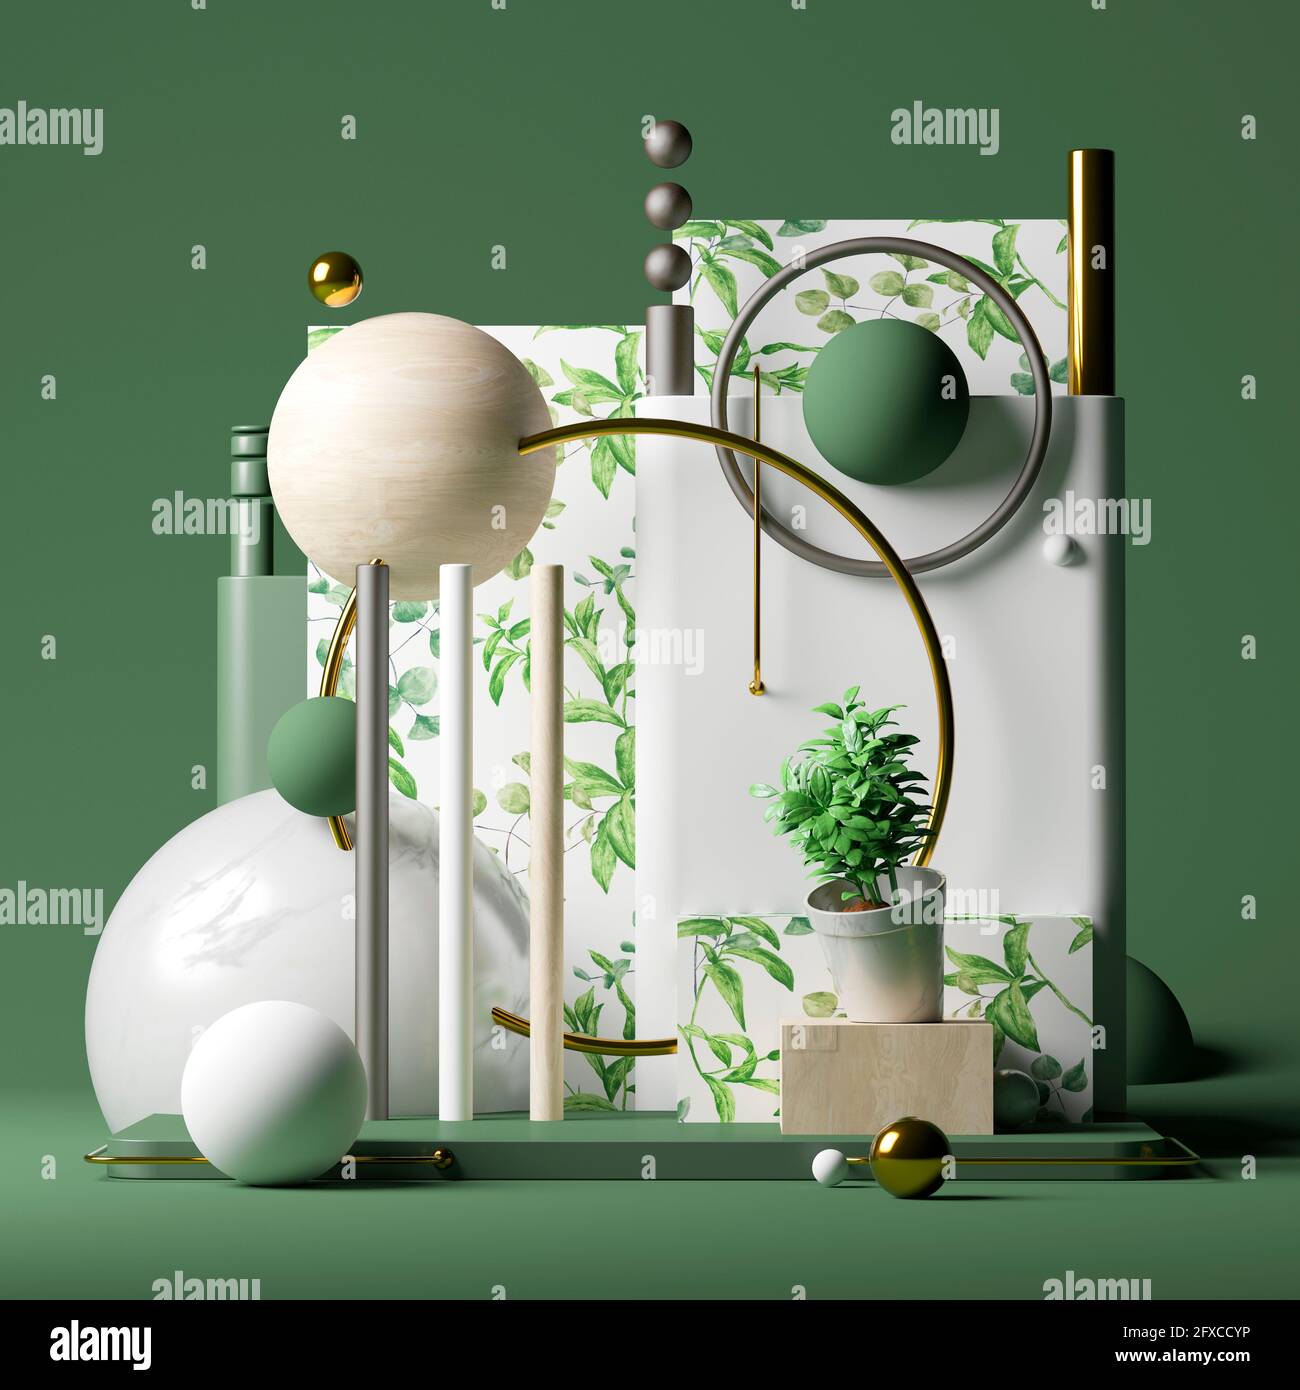 Three dimensional render of pedestal with potted plant, various spheres, tubes and decorative wallpapers with green leaves Stock Photo